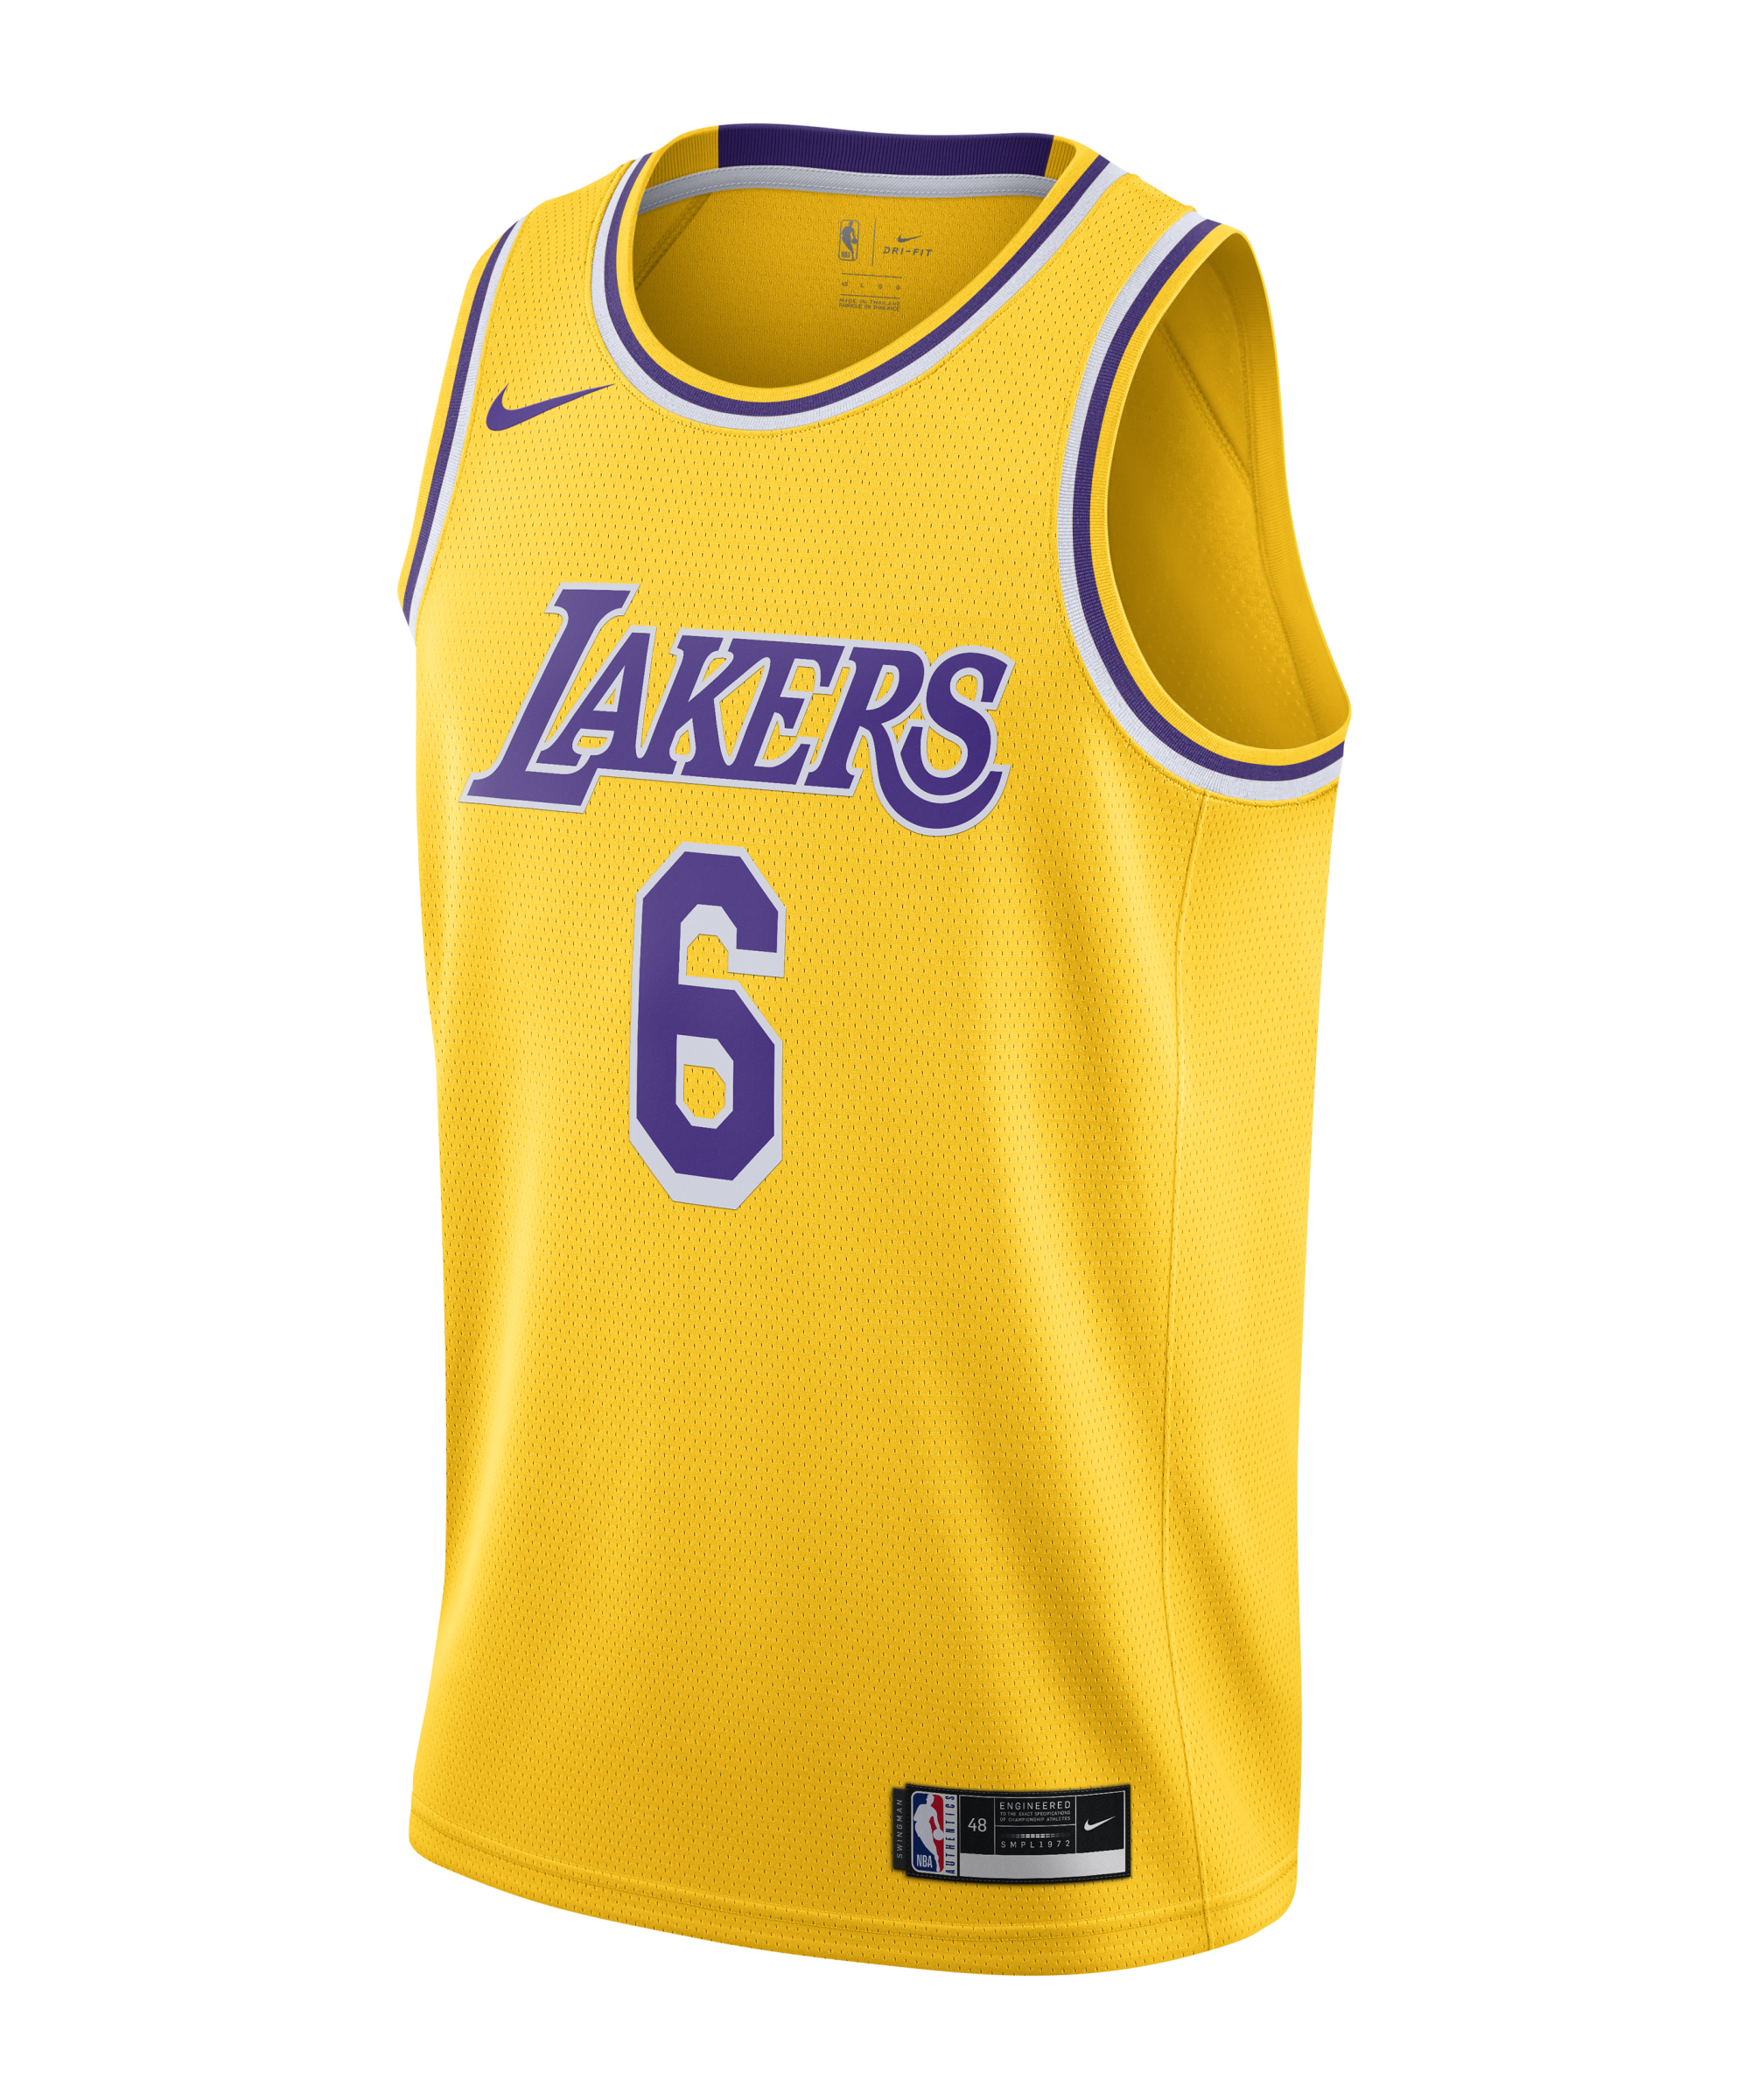 Lebron James Apparel, Lifestyle Clothing, L.A. Lakers